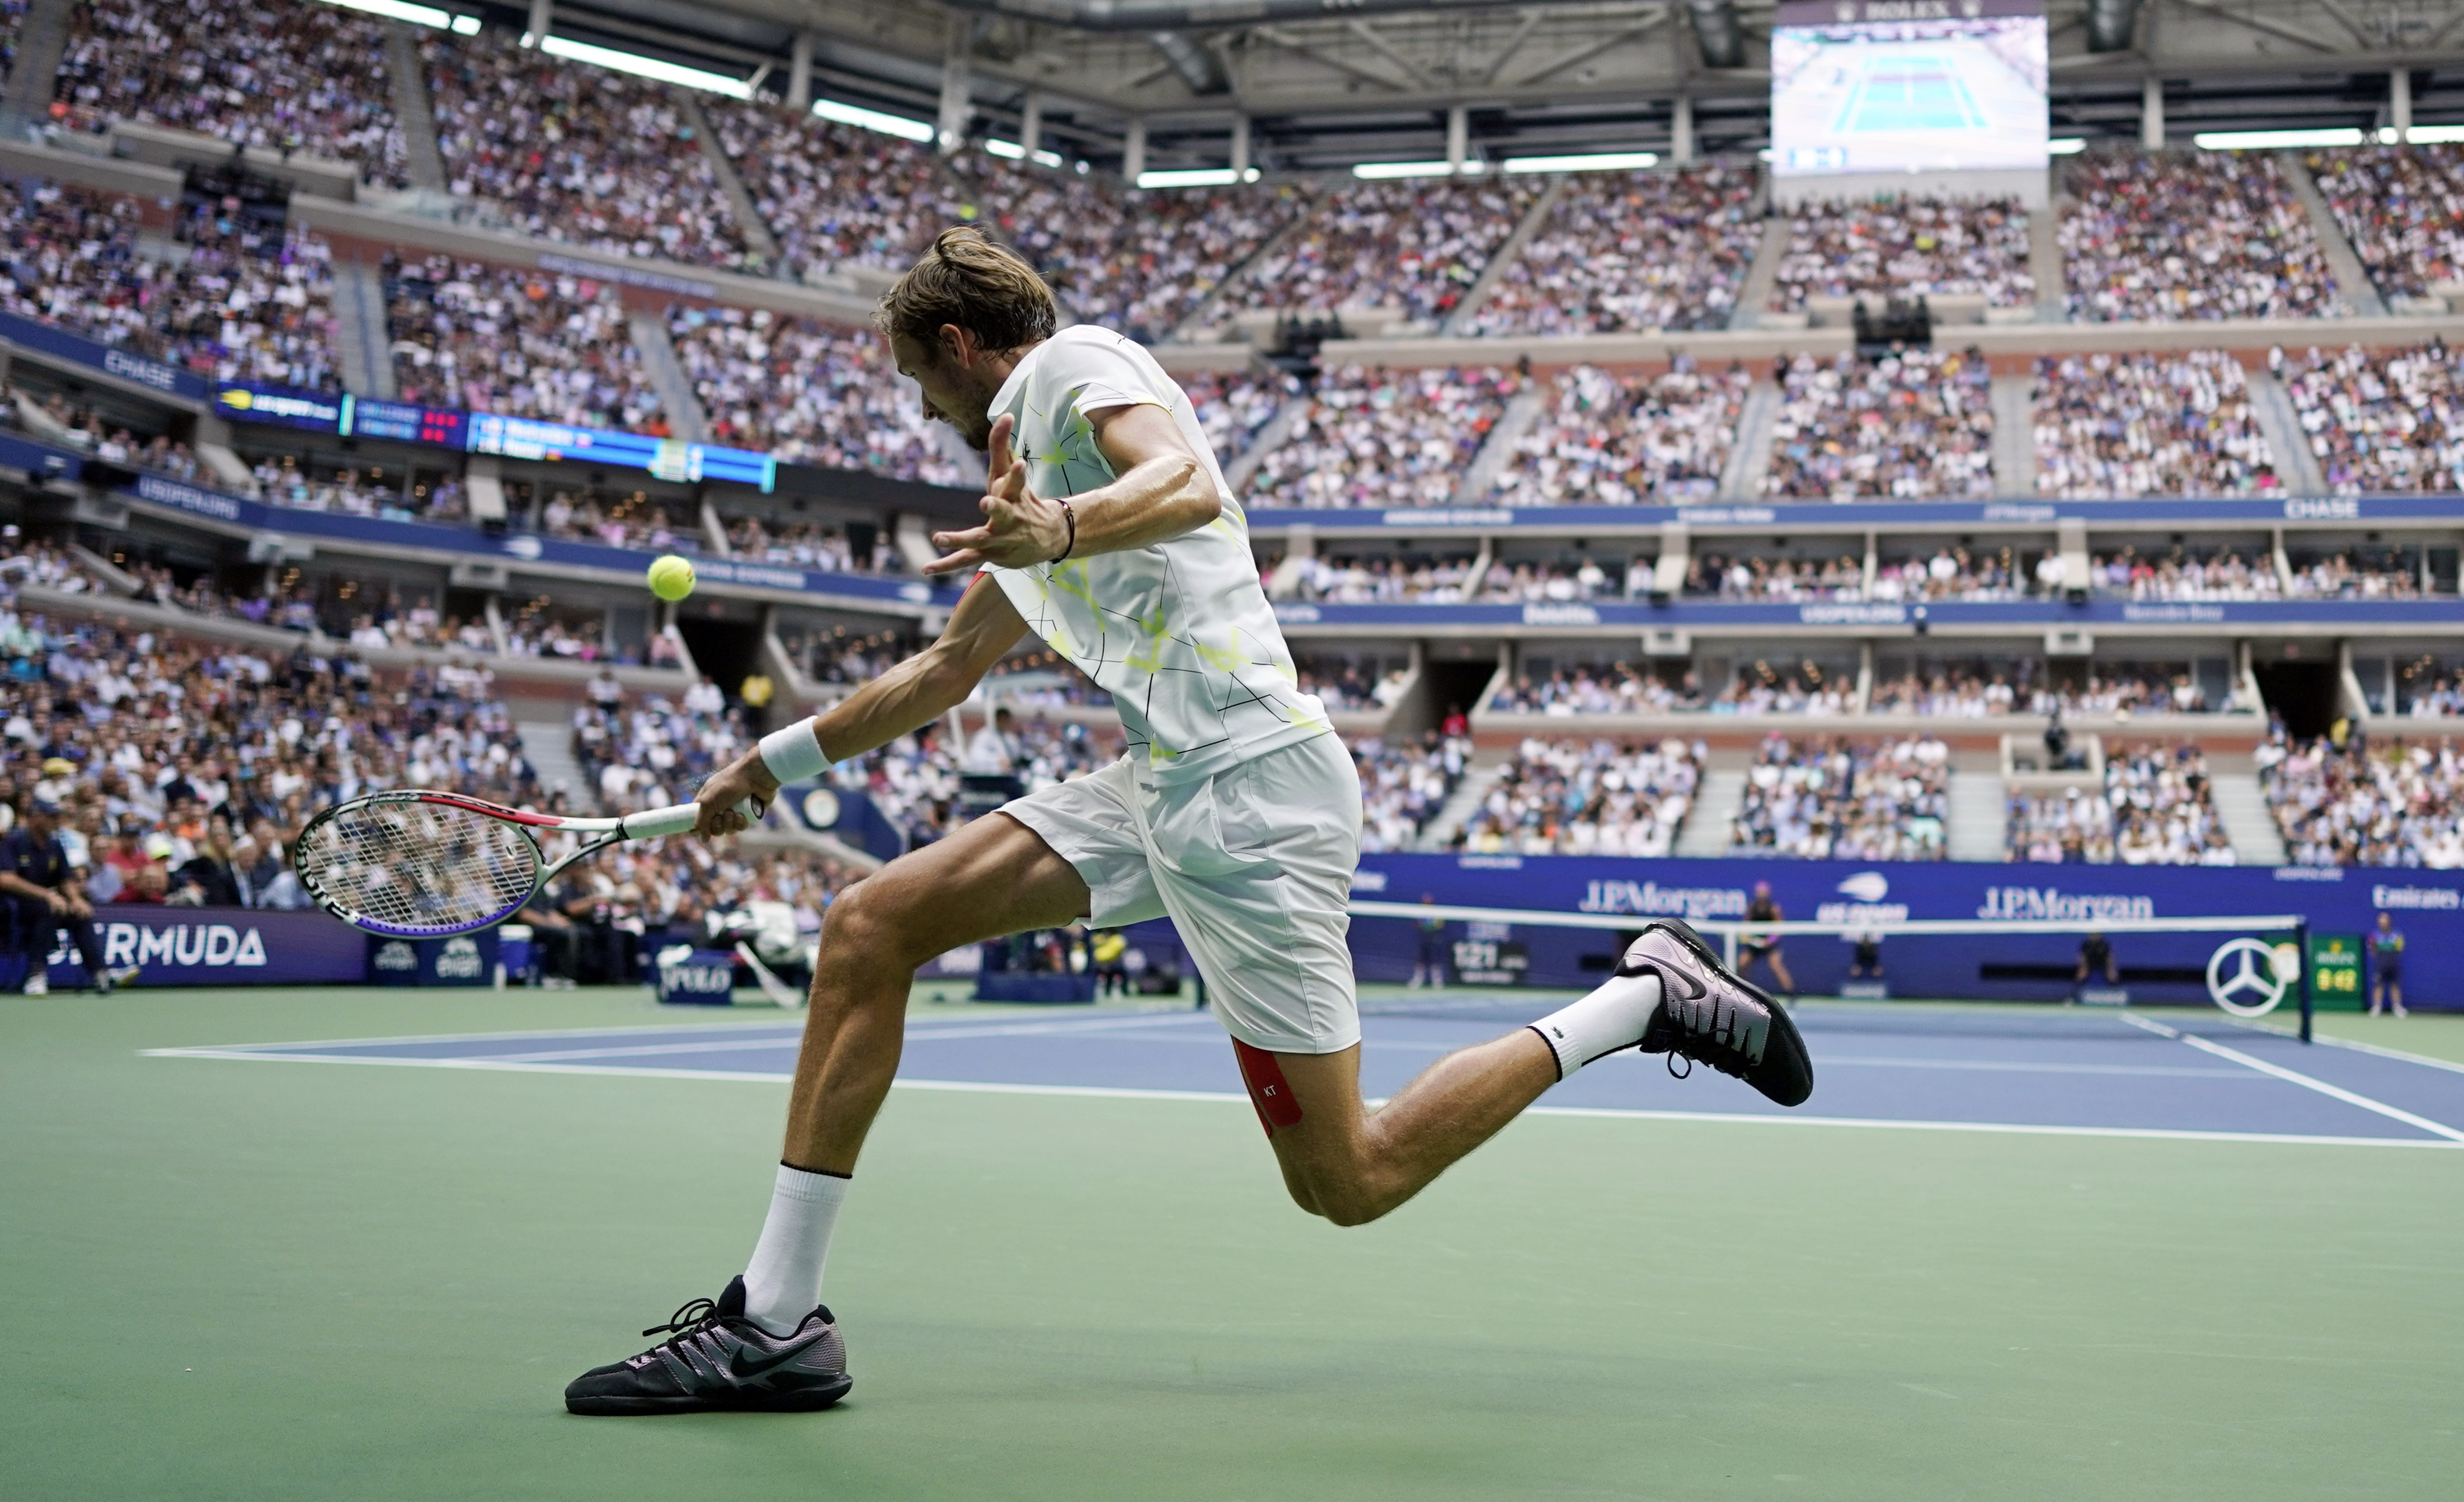 How to watch 2020 US Open TV channel, time, live stream